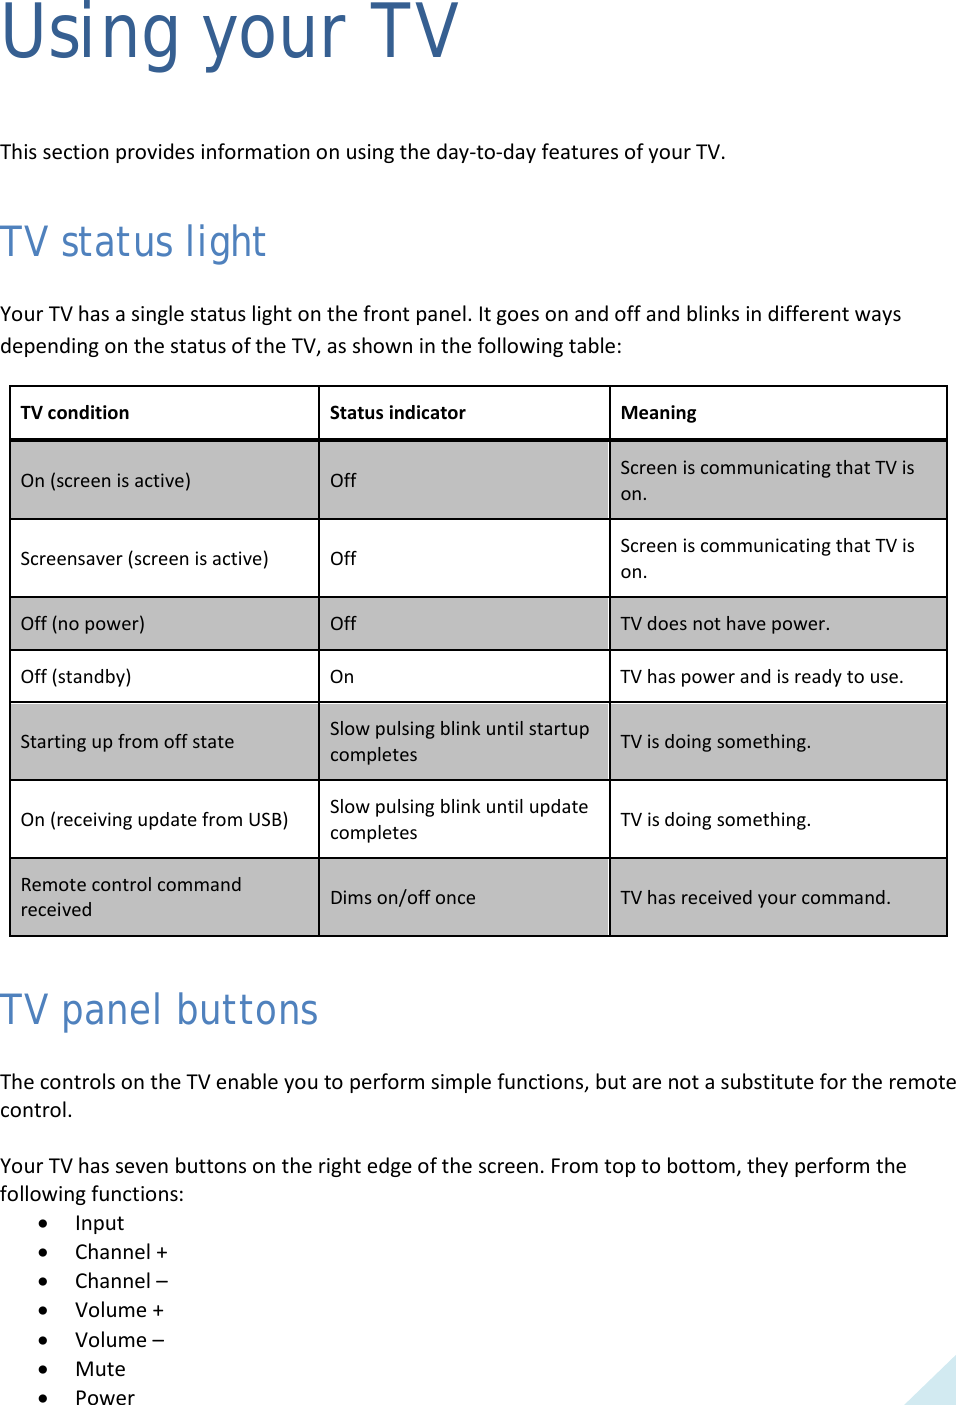  25 Using your TV This section provides information on using the day-to-day features of your TV. TV status light Your TV has a single status light on the front panel. It goes on and off and blinks in different ways depending on the status of the TV, as shown in the following table: TV condition Status indicator Meaning On (screen is active) Off Screen is communicating that TV is on. Screensaver (screen is active) Off Screen is communicating that TV is on. Off (no power) Off TV does not have power. Off (standby) On TV has power and is ready to use. Starting up from off state Slow pulsing blink until startup completes TV is doing something. On (receiving update from USB) Slow pulsing blink until update completes TV is doing something. Remote control command received Dims on/off once TV has received your command. TV panel buttons The controls on the TV enable you to perform simple functions, but are not a substitute for the remote control.  Your TV has seven buttons on the right edge of the screen. From top to bottom, they perform the following functions: • Input • Channel + • Channel –  • Volume + • Volume –  • Mute • Power  